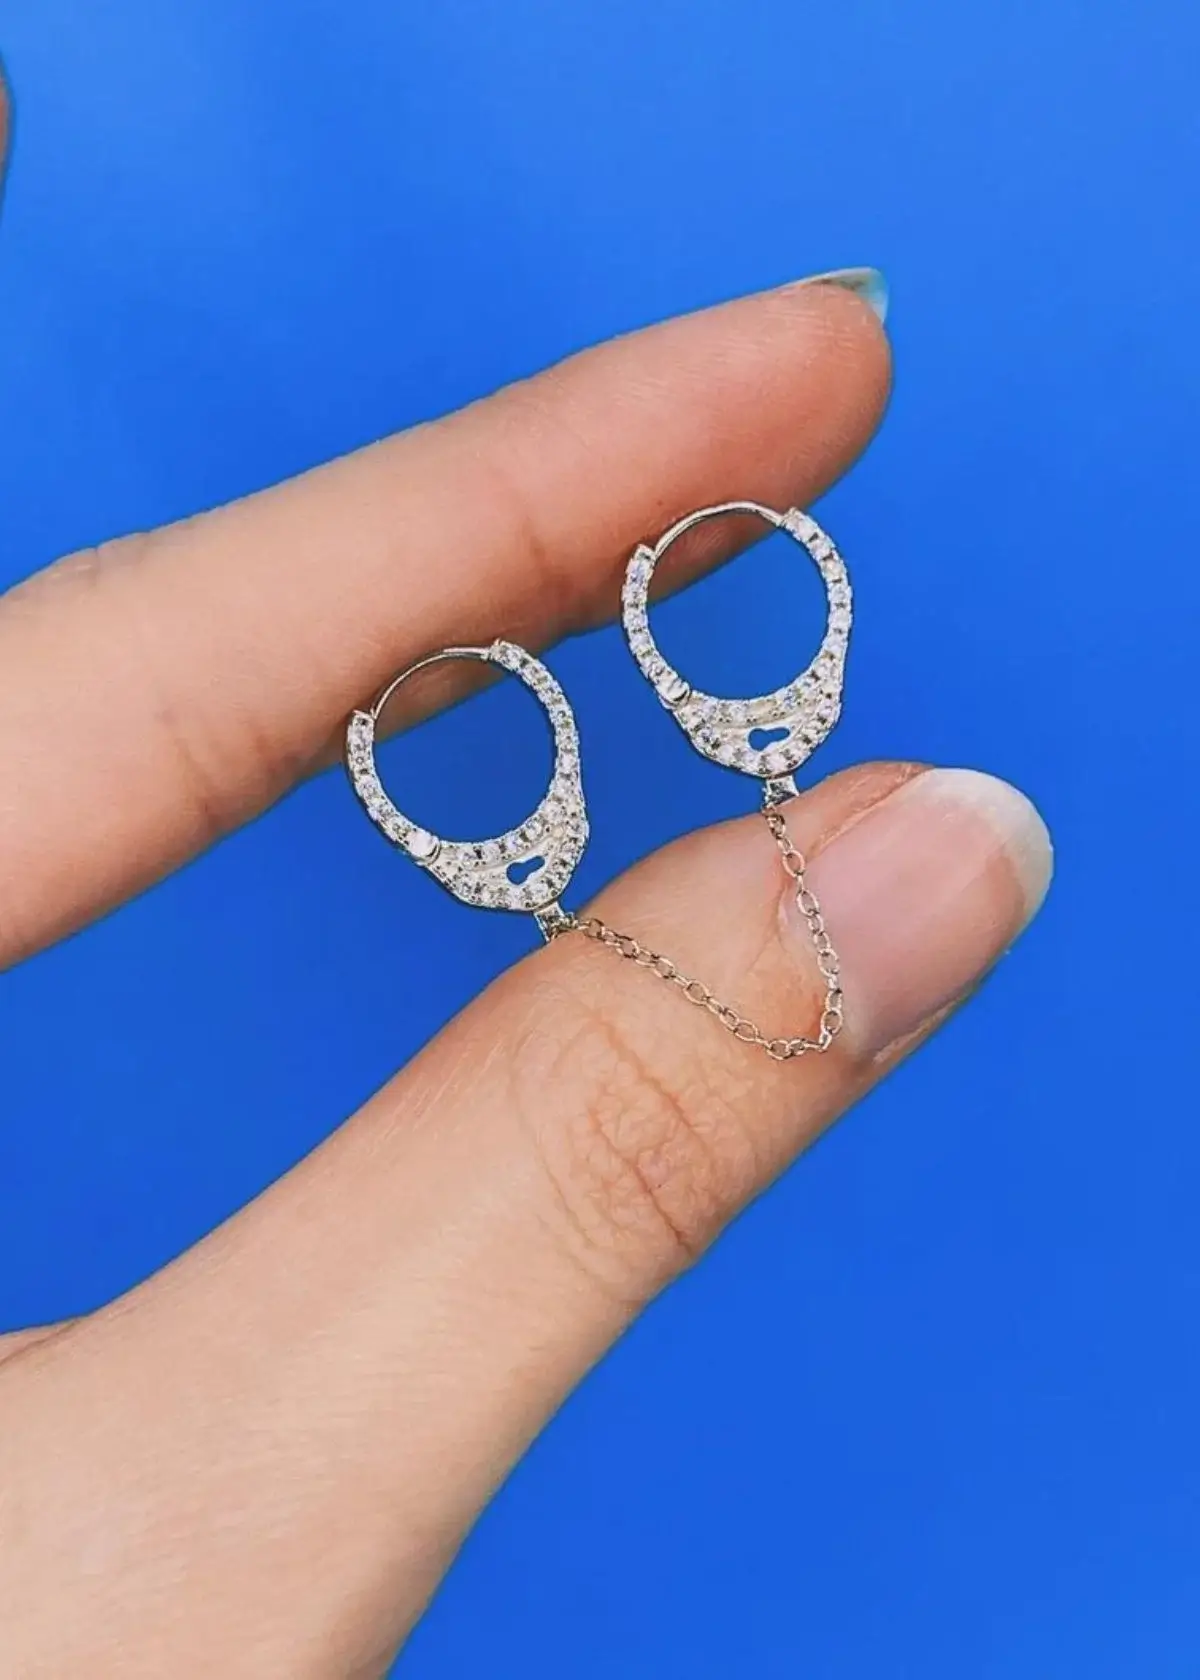 What materials are handcuff earrings made from?